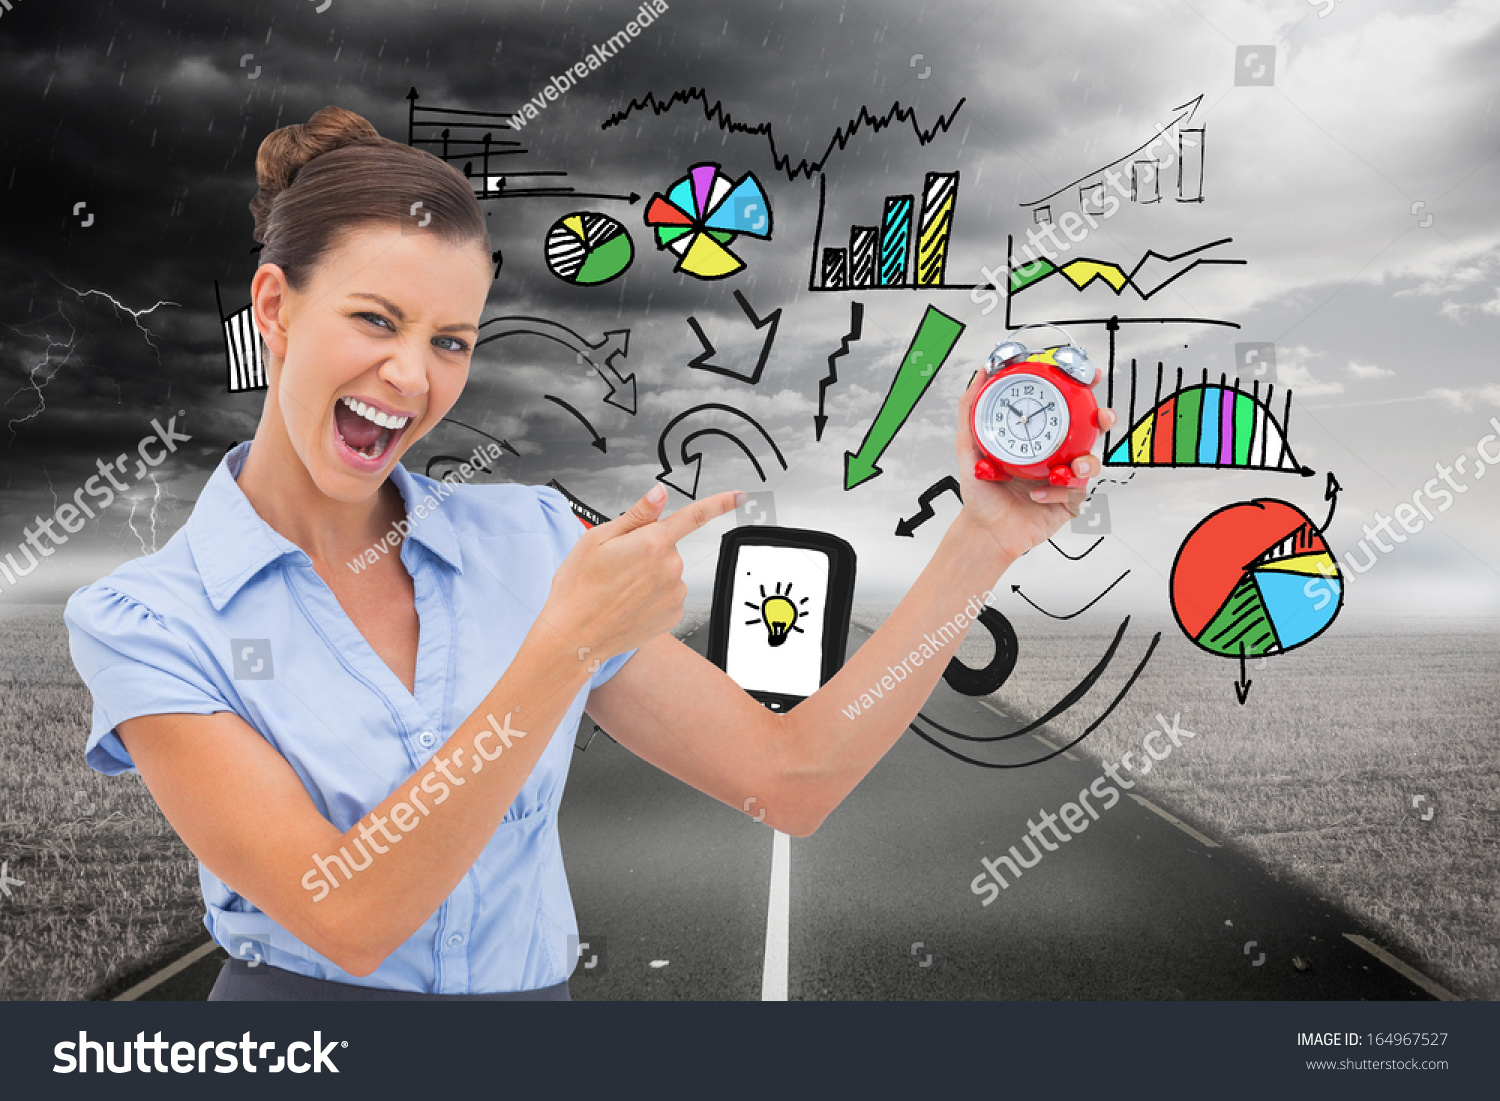 Composite image of businesswoman indicating alarm clock with finger #164967527